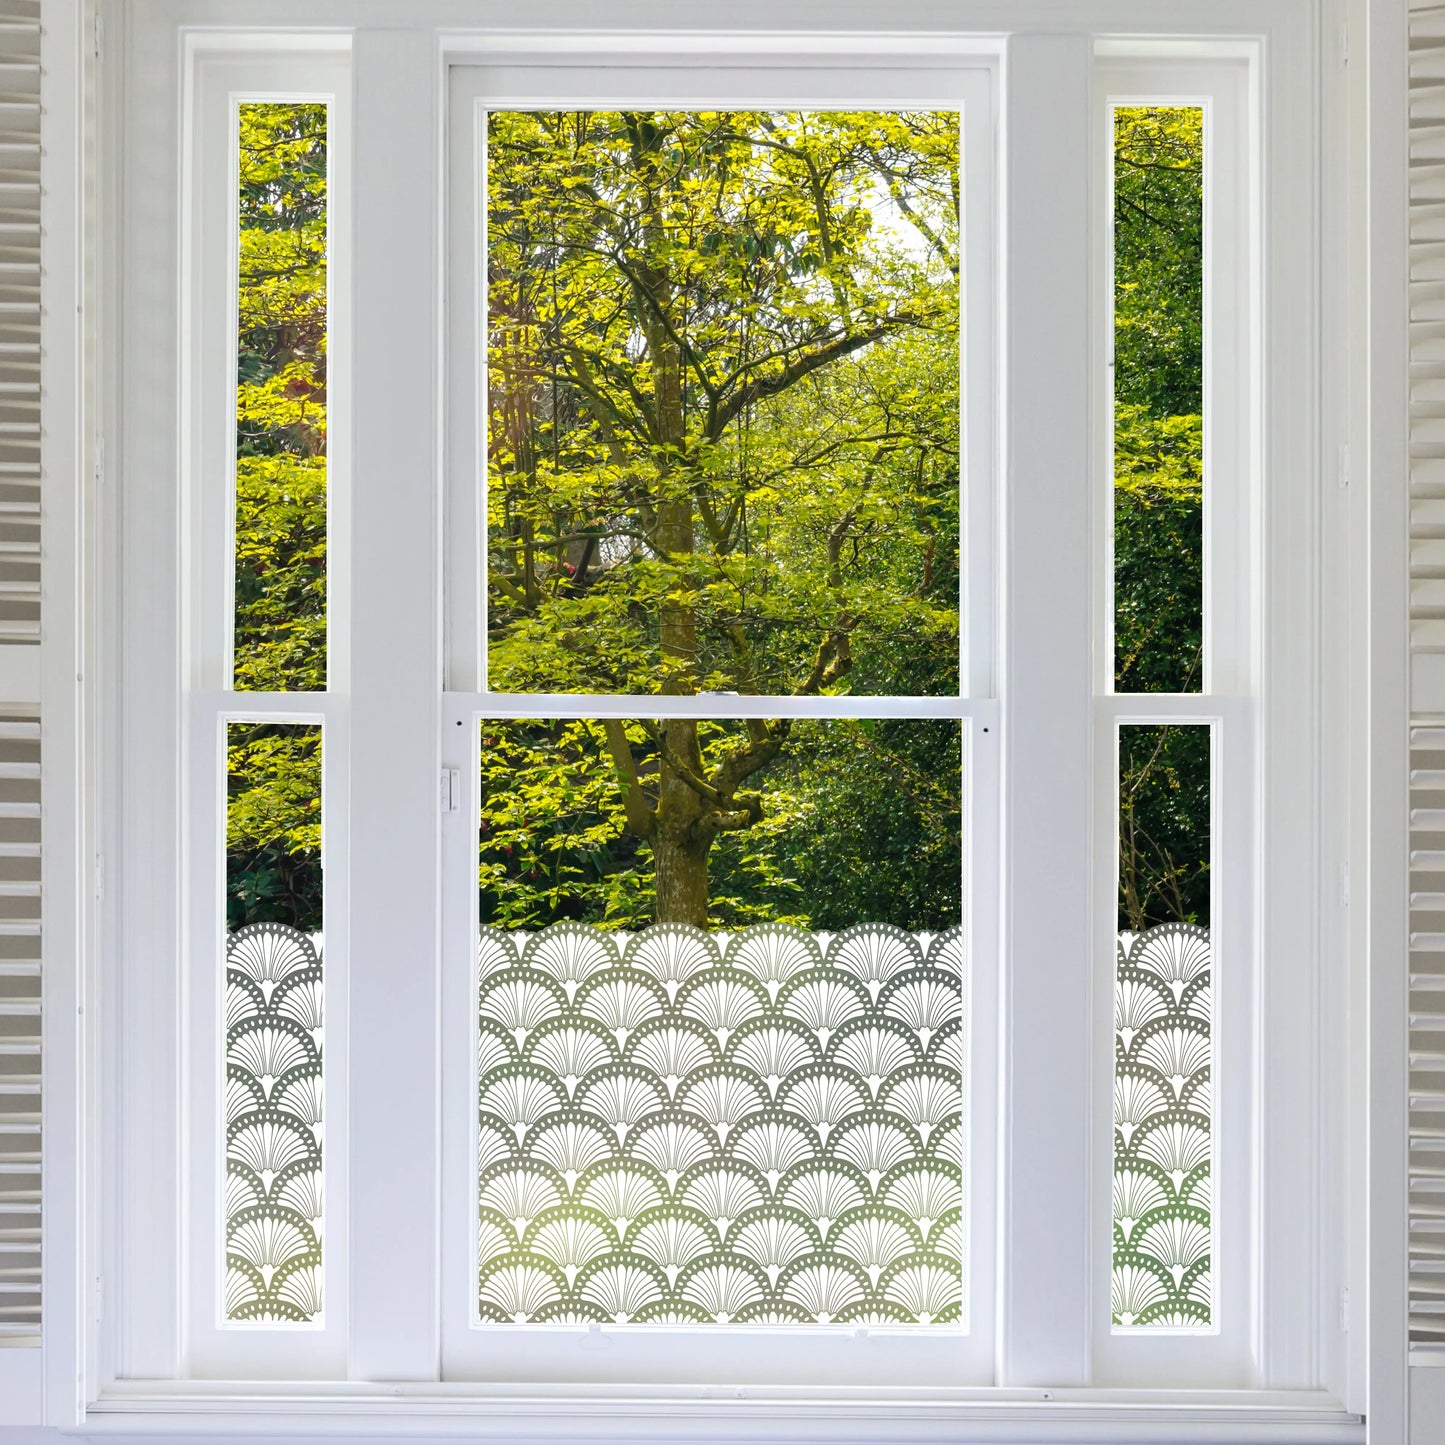 Privacy Window Thebes Frosted Window Privacy Border Dizzy Duck Designs